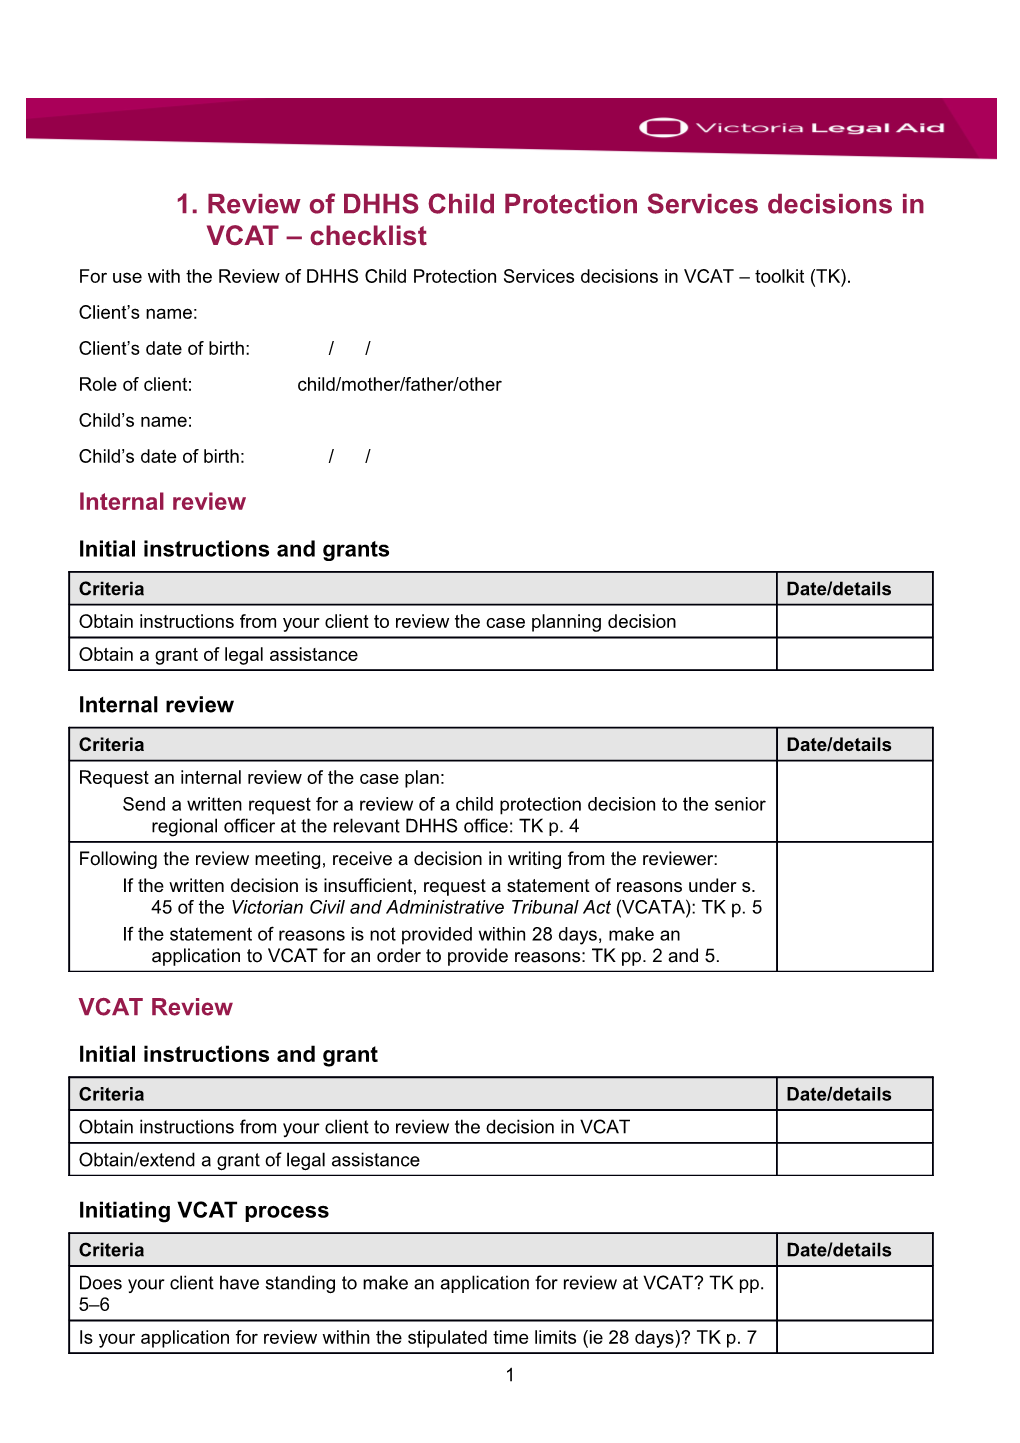 Review of DHHS Child Protection Services Decisions in VCAT Checklist